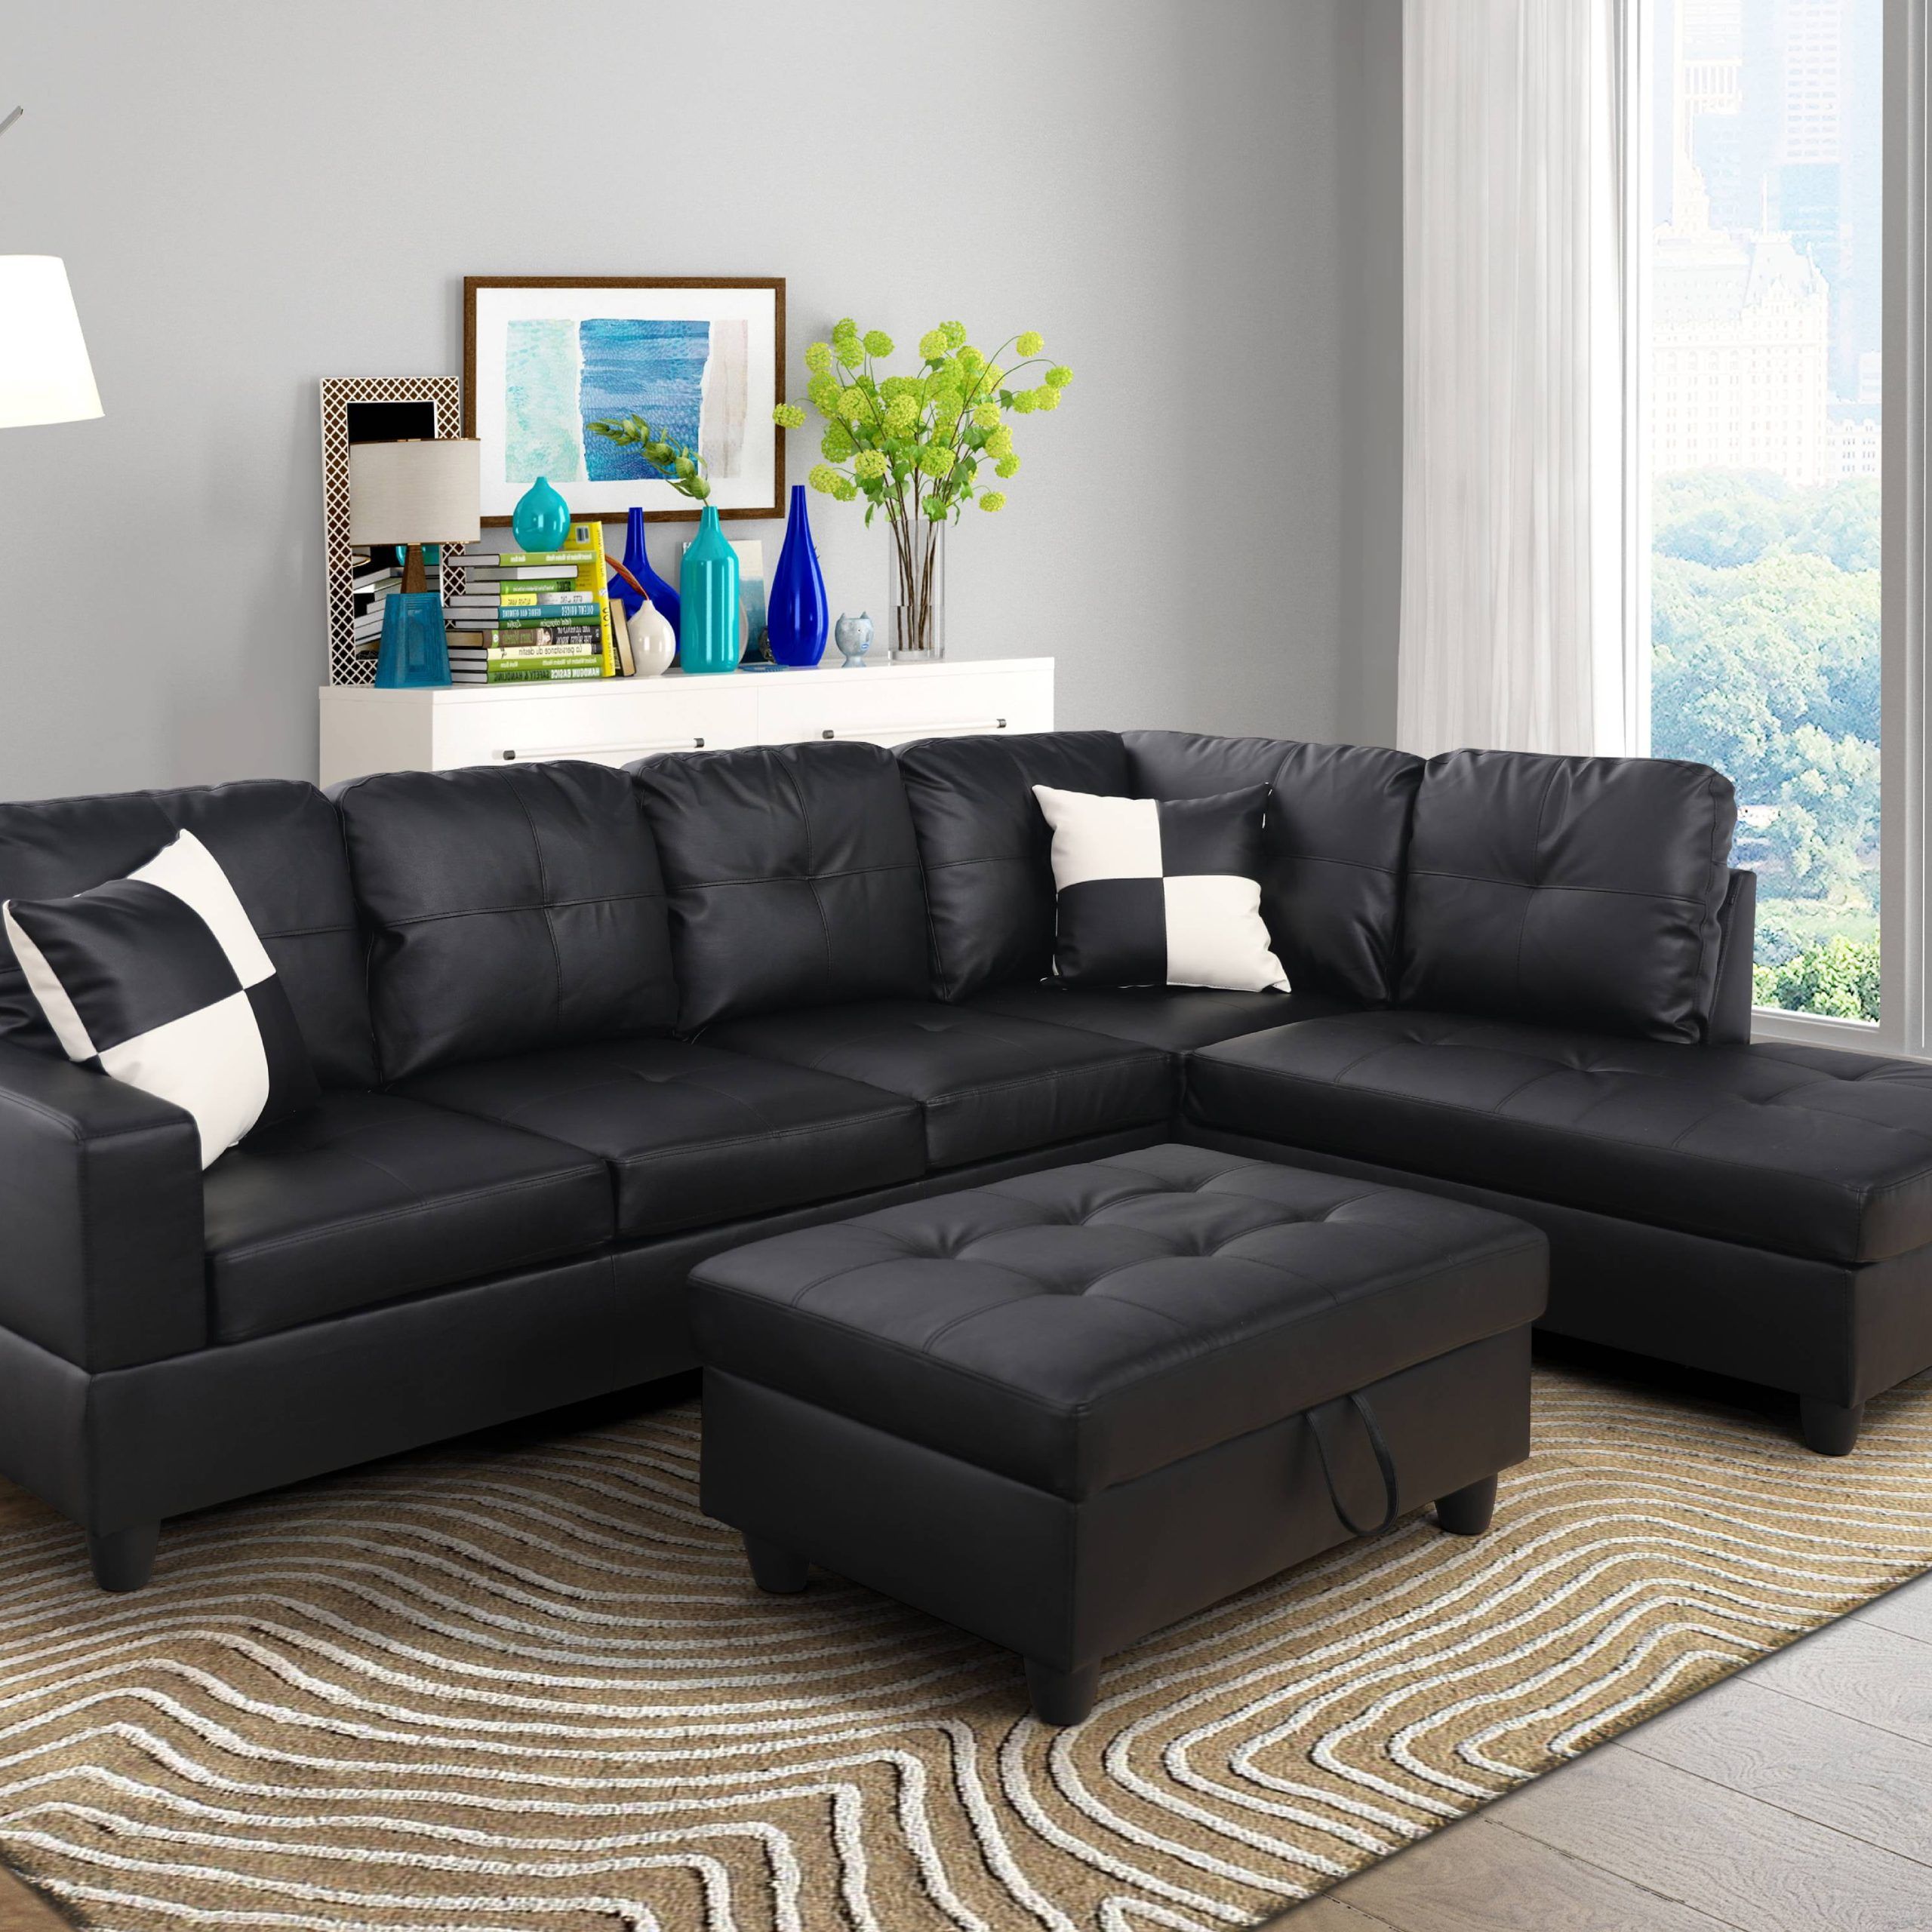 For U Furnishing Classic Black Faux Leather Sectional Sofa, Right Pertaining To Faux Leather Sectional Sofa Sets (Gallery 1 of 21)